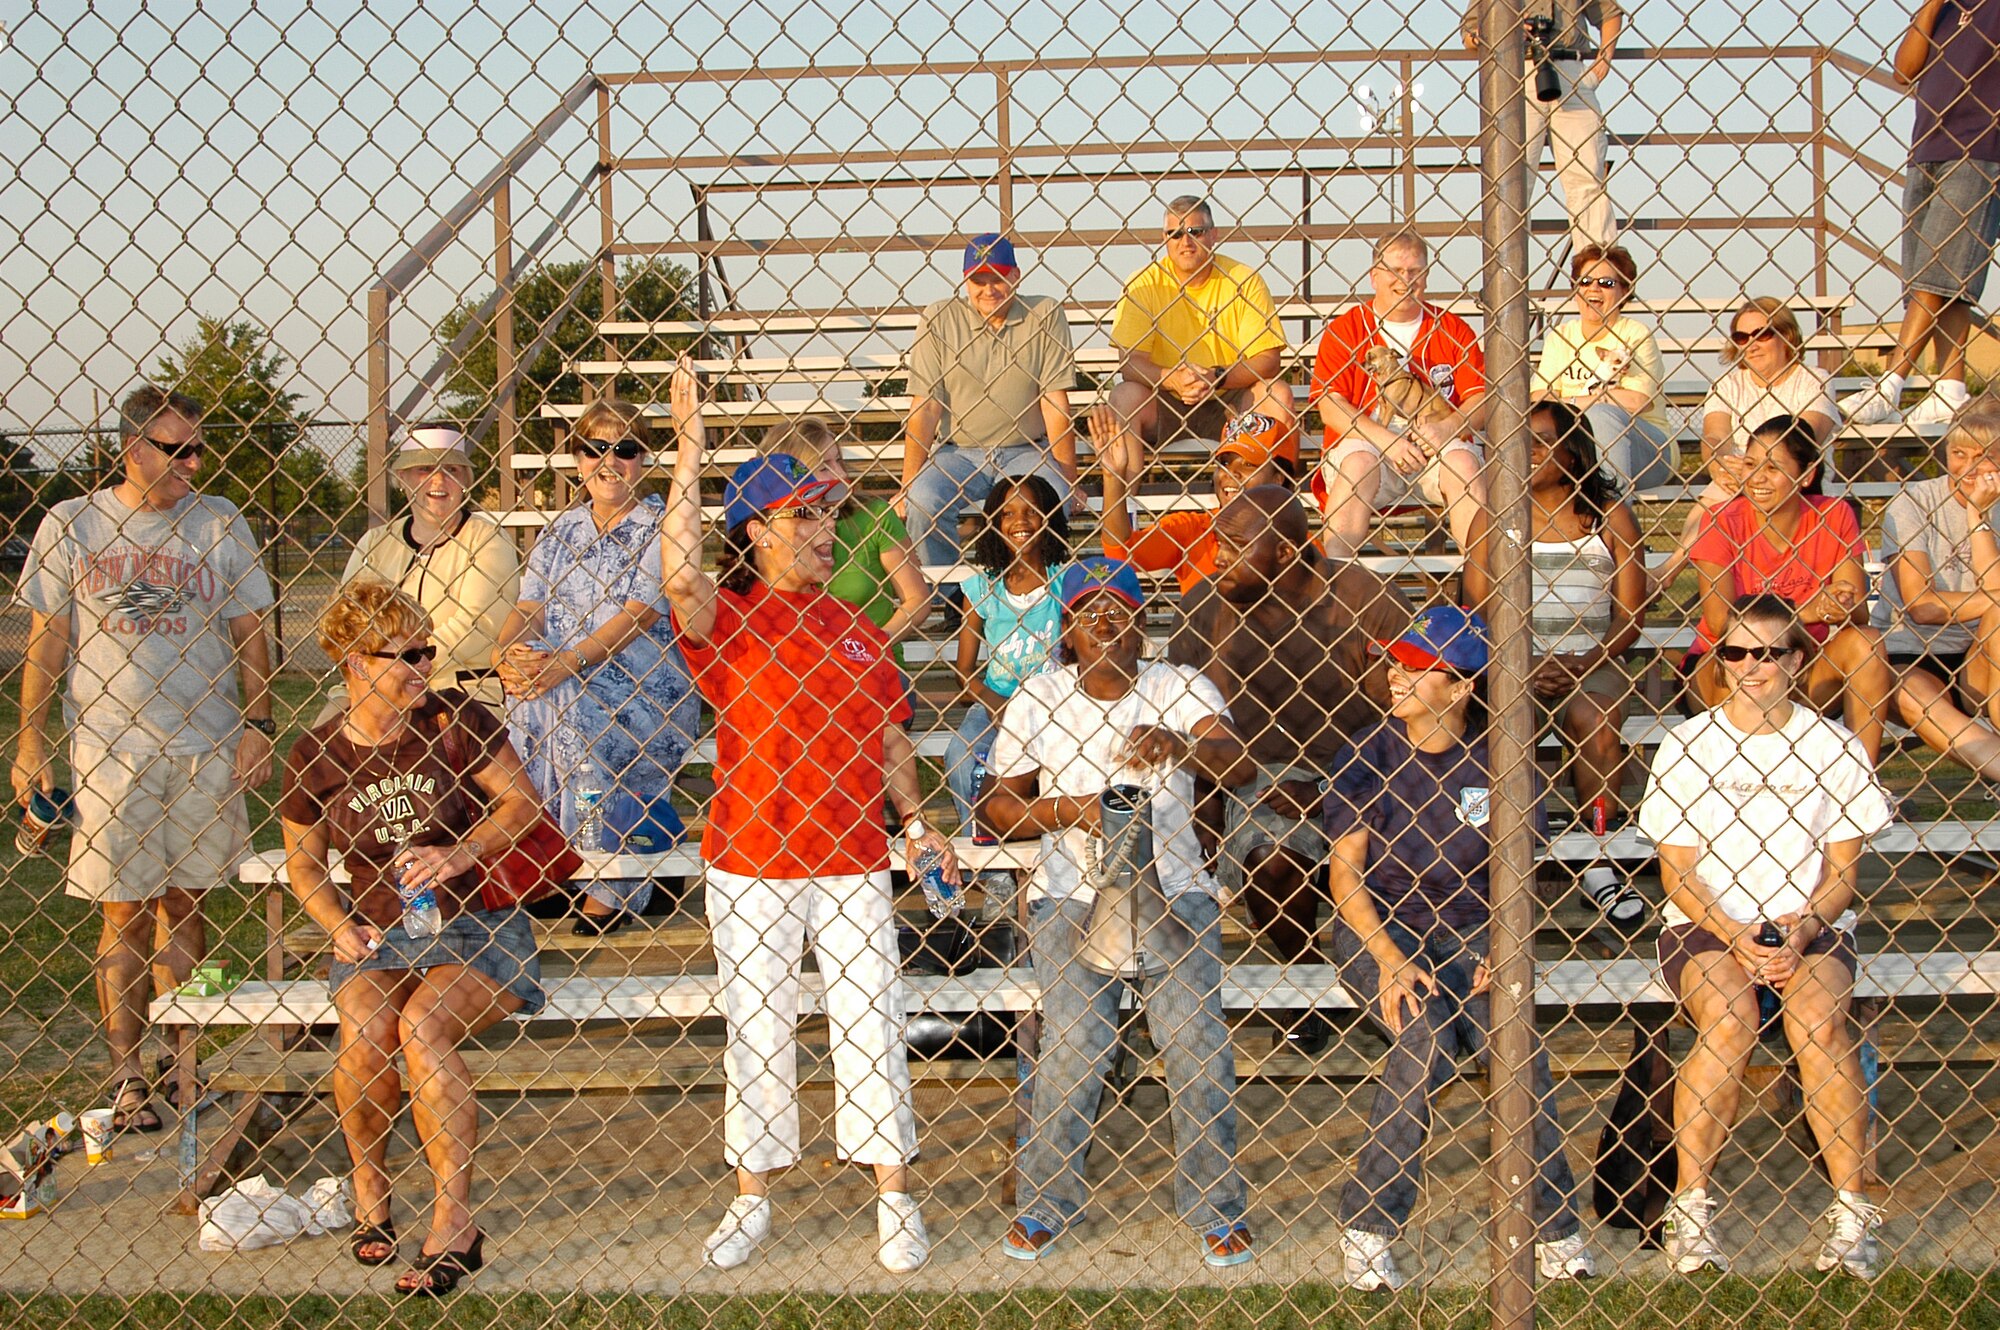 AFOSI friends, families and fans cheer on their Gators. The Gators won both games, 16-2 and 4-2 respectivley, to win the Andrews Air Force Base Intramural Softball Championship. (U.S. Air Force photo/Tech. Sgt John Jung)